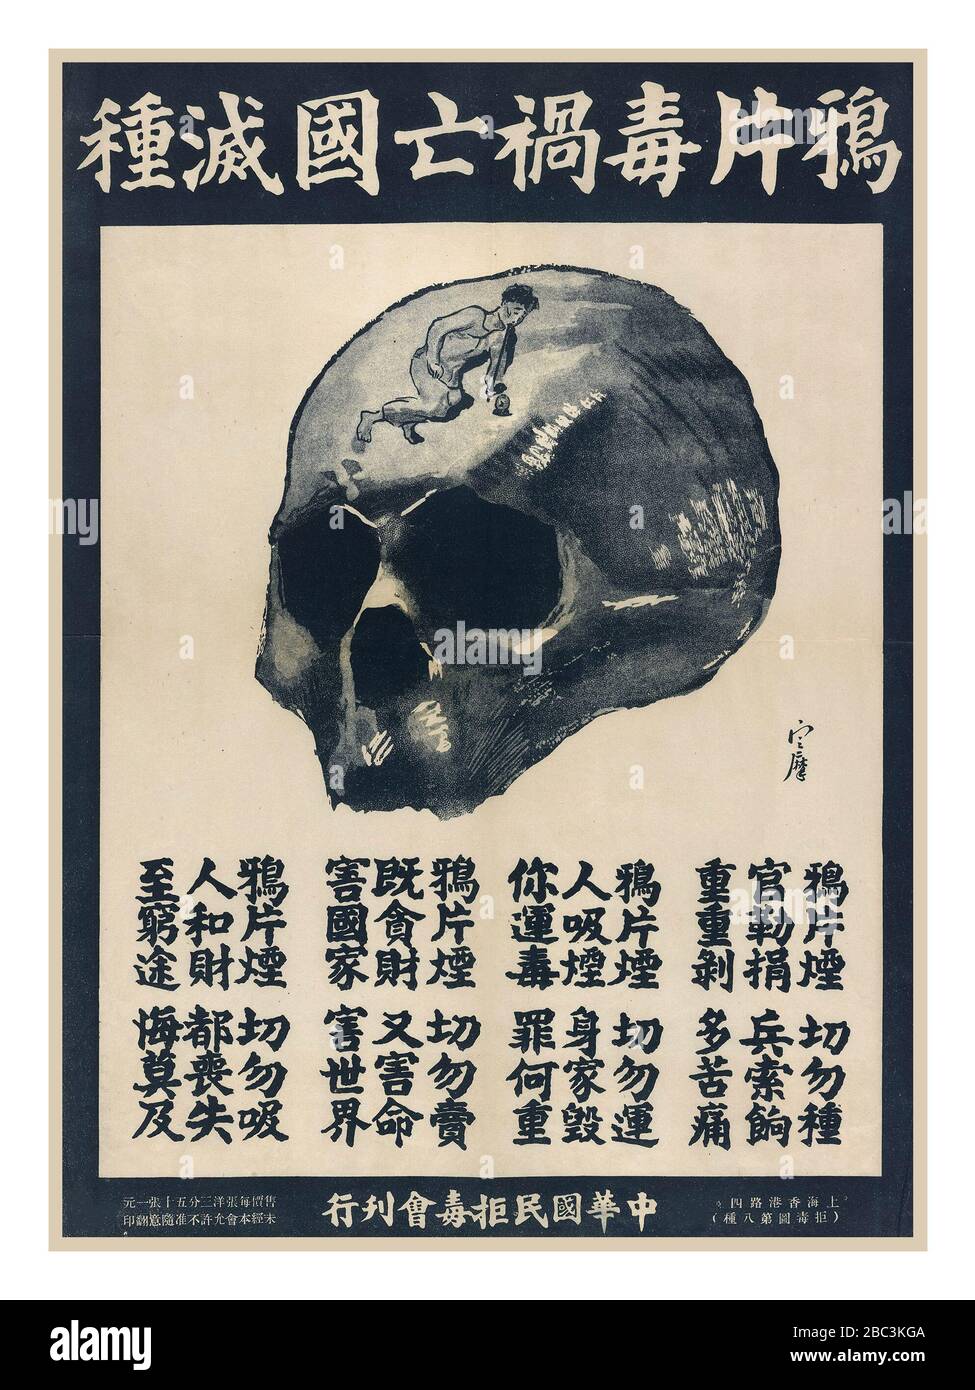 OPIUM Vintage 1930er Jahre China Chinese Propaganda Cautionary Warning Poster The Scourge of Opium Ruins Countries and exterminates PEOPLES" China, 1930er Jahre Stockfoto